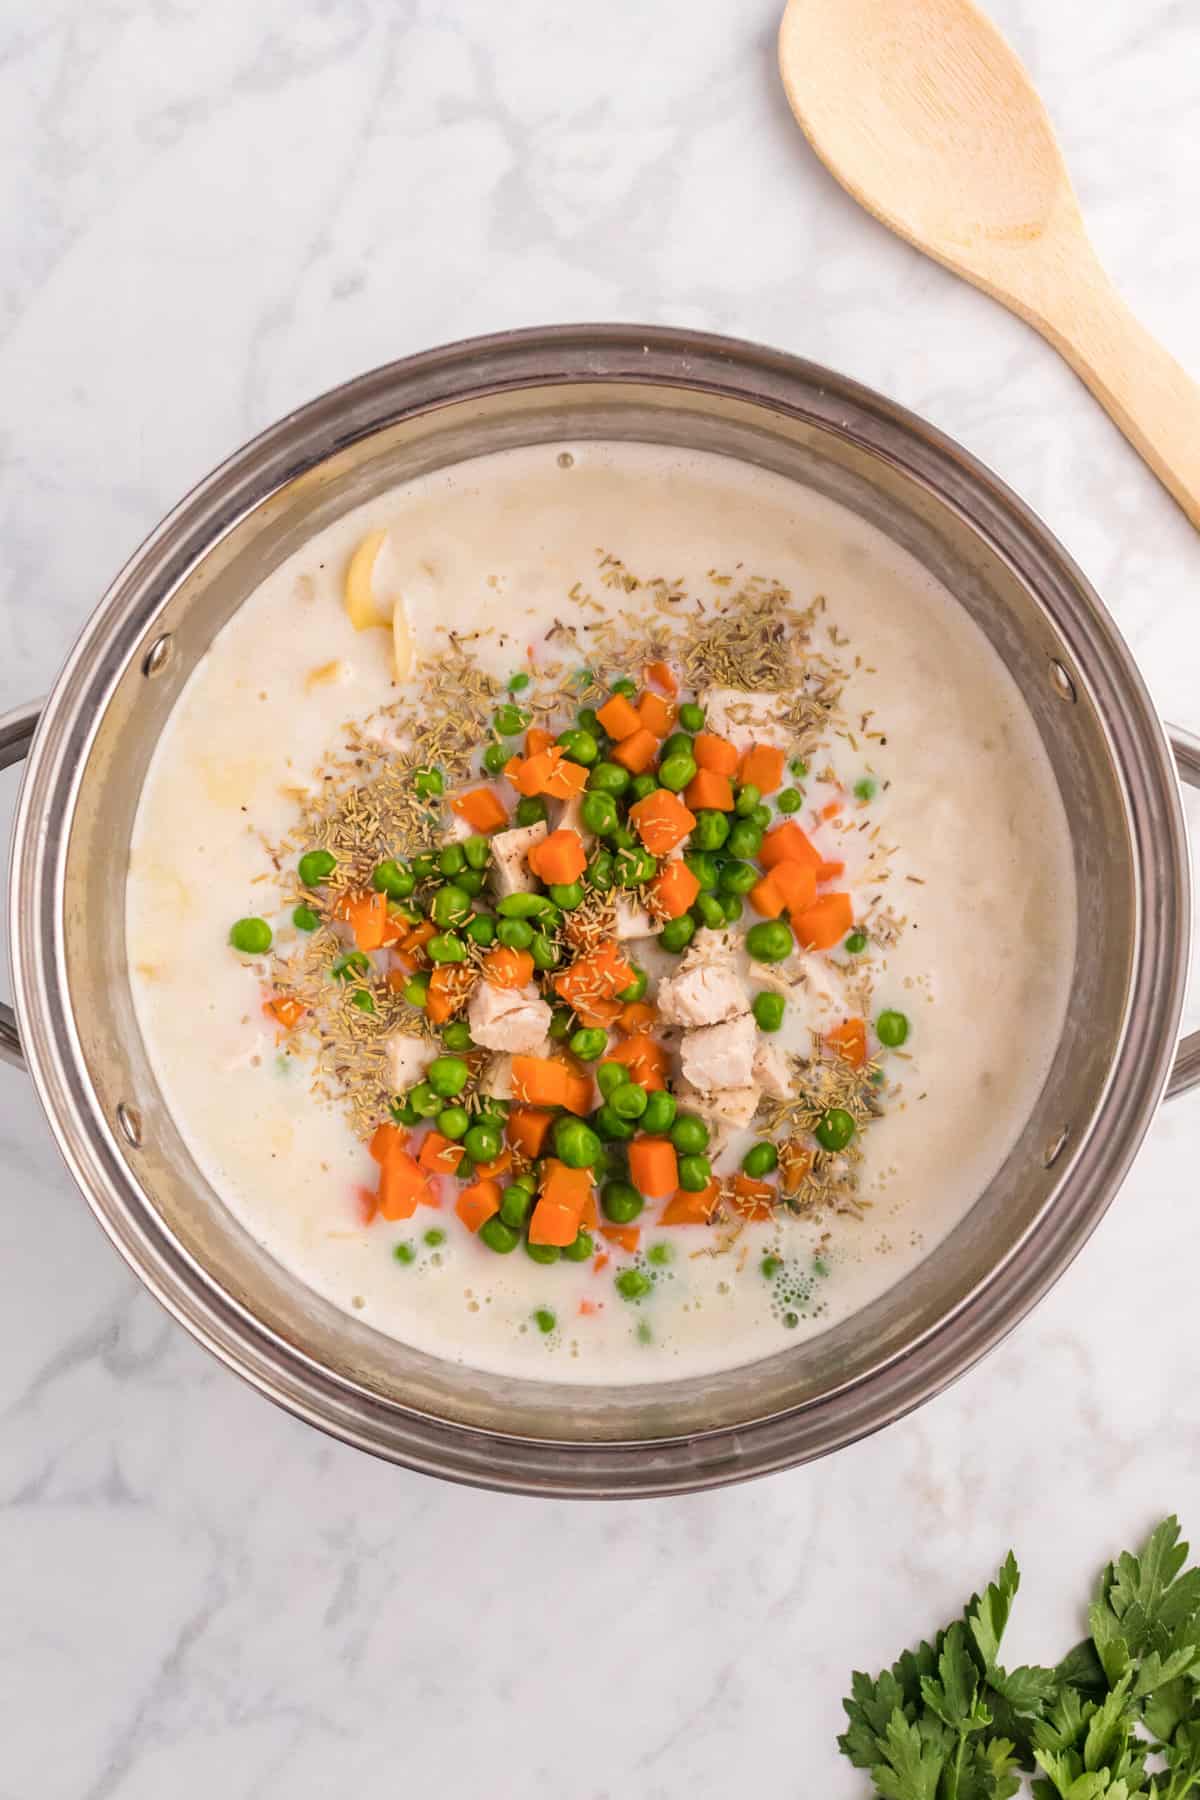 A pot of soup is topped with all of the ingredients like chicken and veggies that have yet to be stirred into the broth.